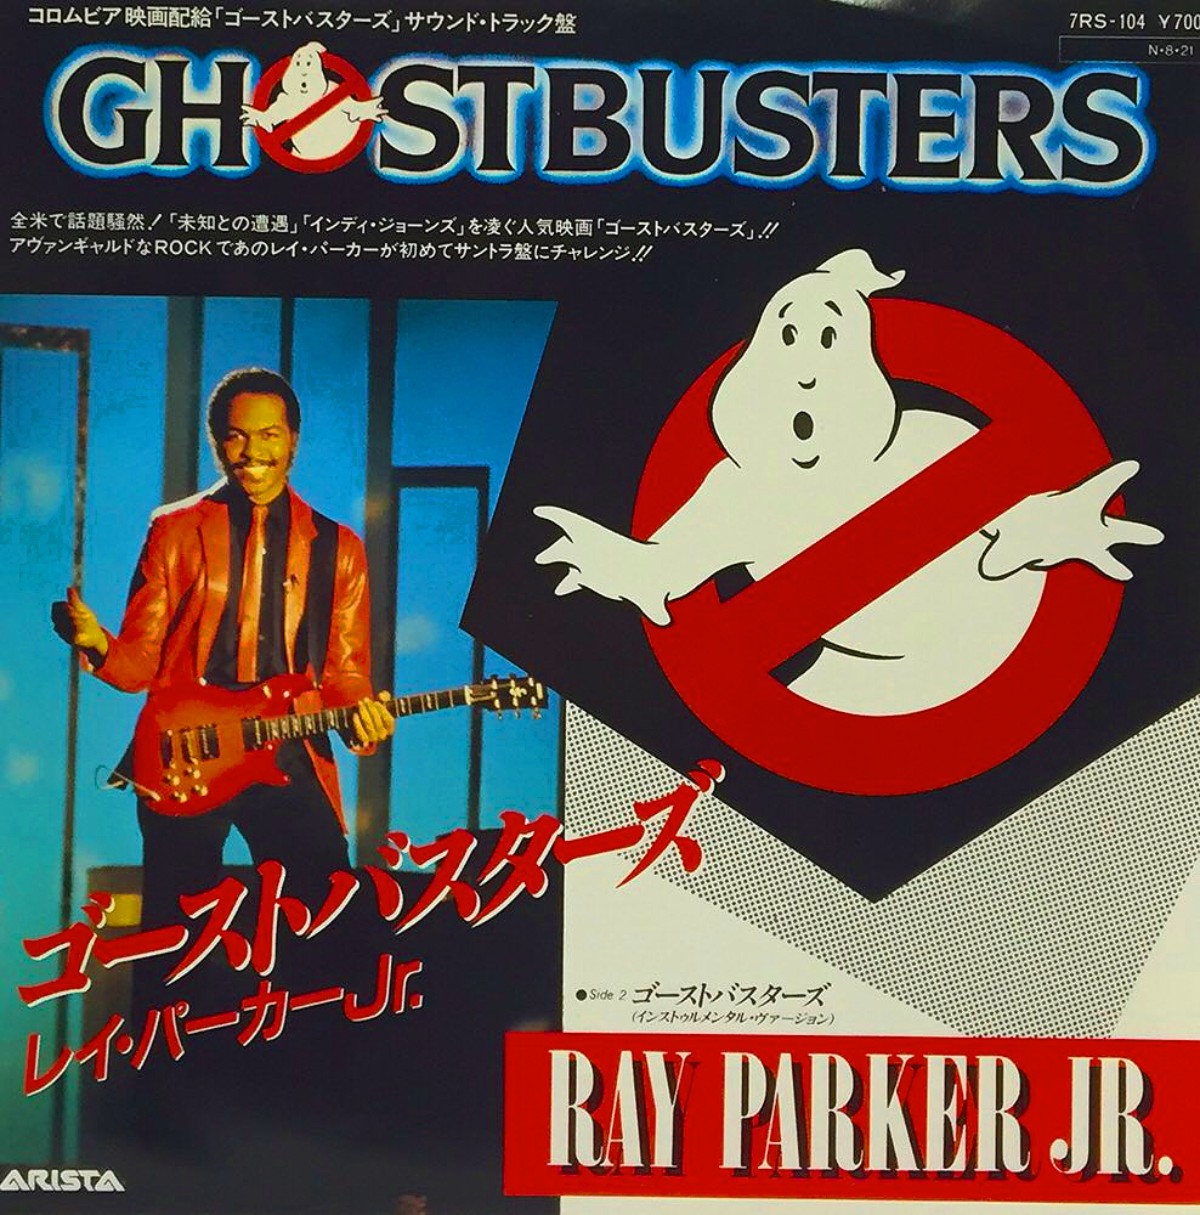 Ghostbusters (1984) - Ray Parker JR - couverture simple